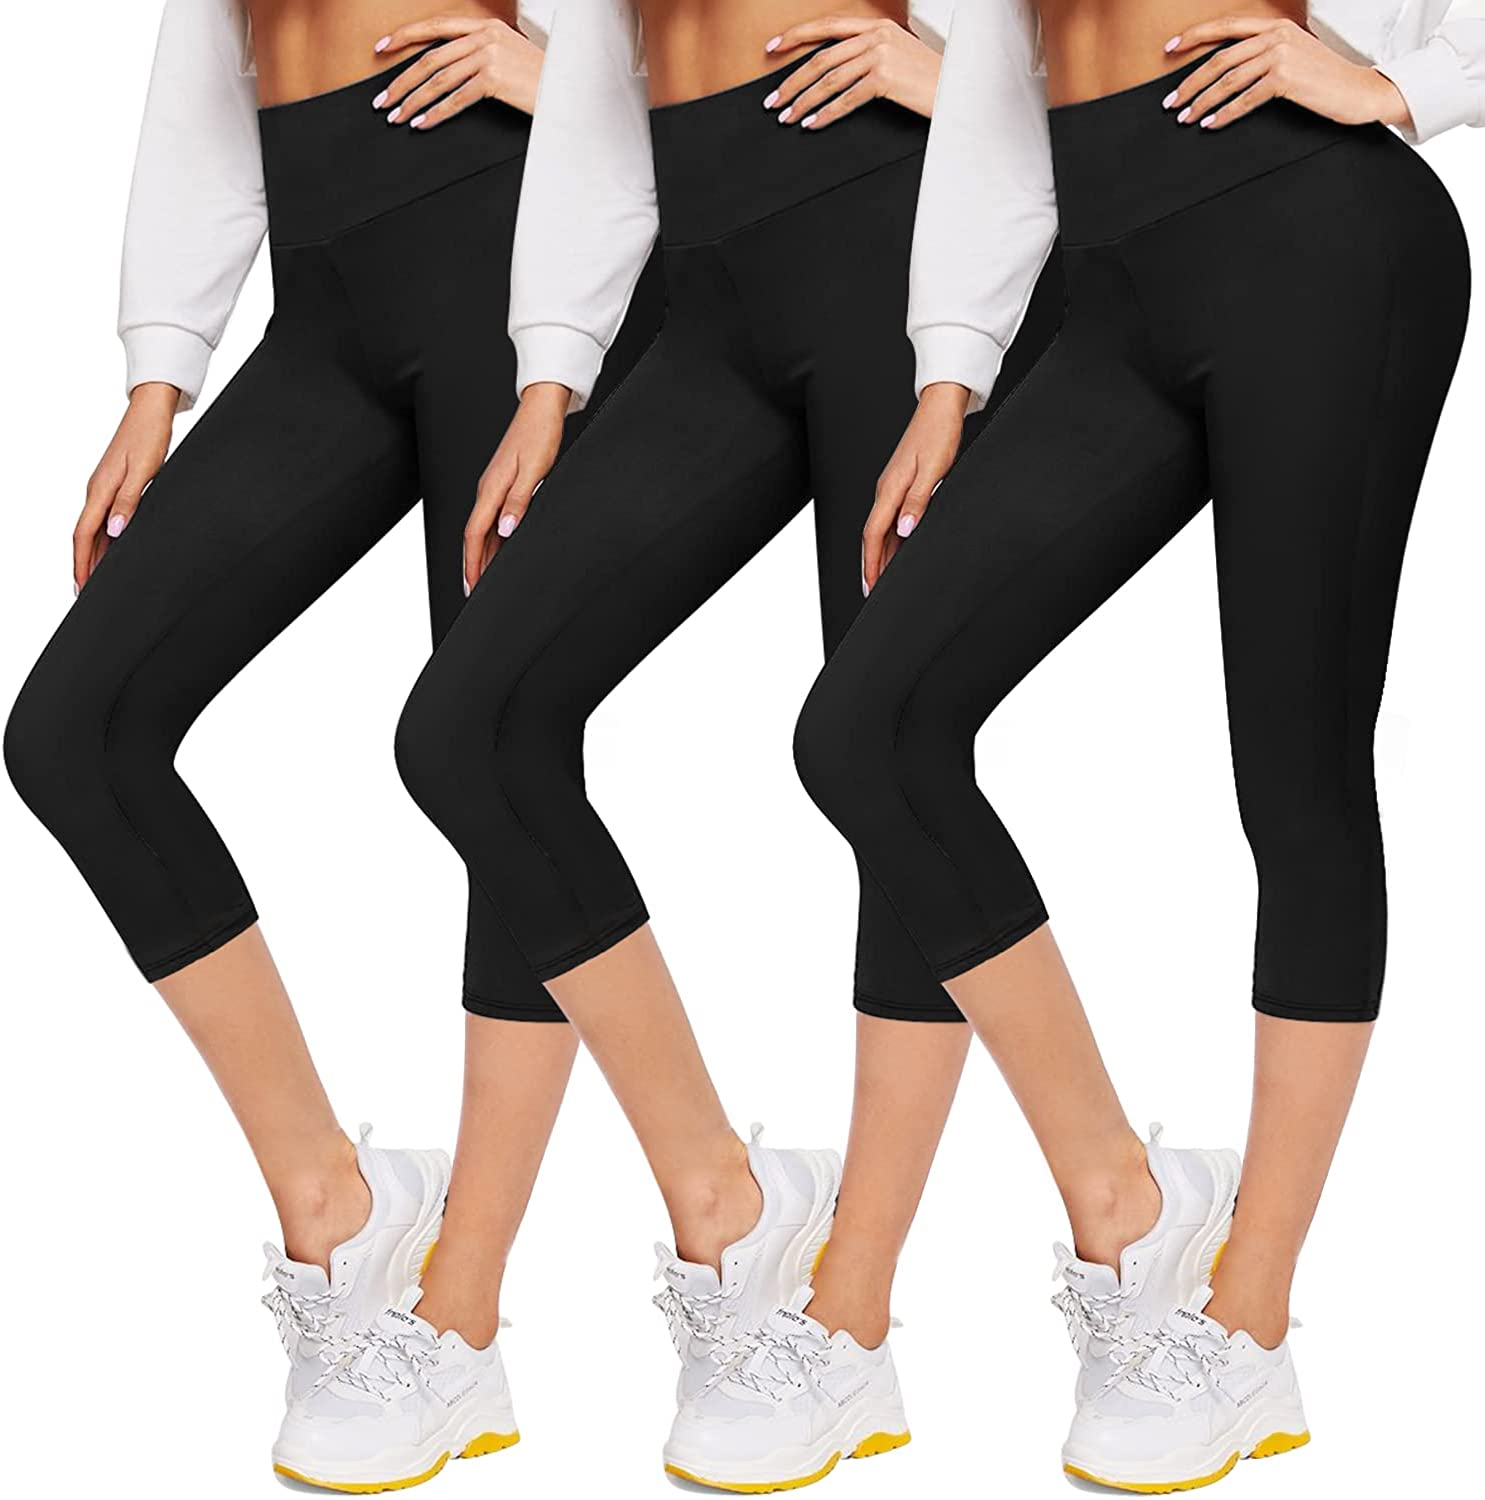  GROTEEN 3 Pack Fleece Lined Leggings with Pockets for Women-High  Waist Tummy Control Yoga Pants Thermal Winter Leggings Black/Black/Black :  Clothing, Shoes & Jewelry